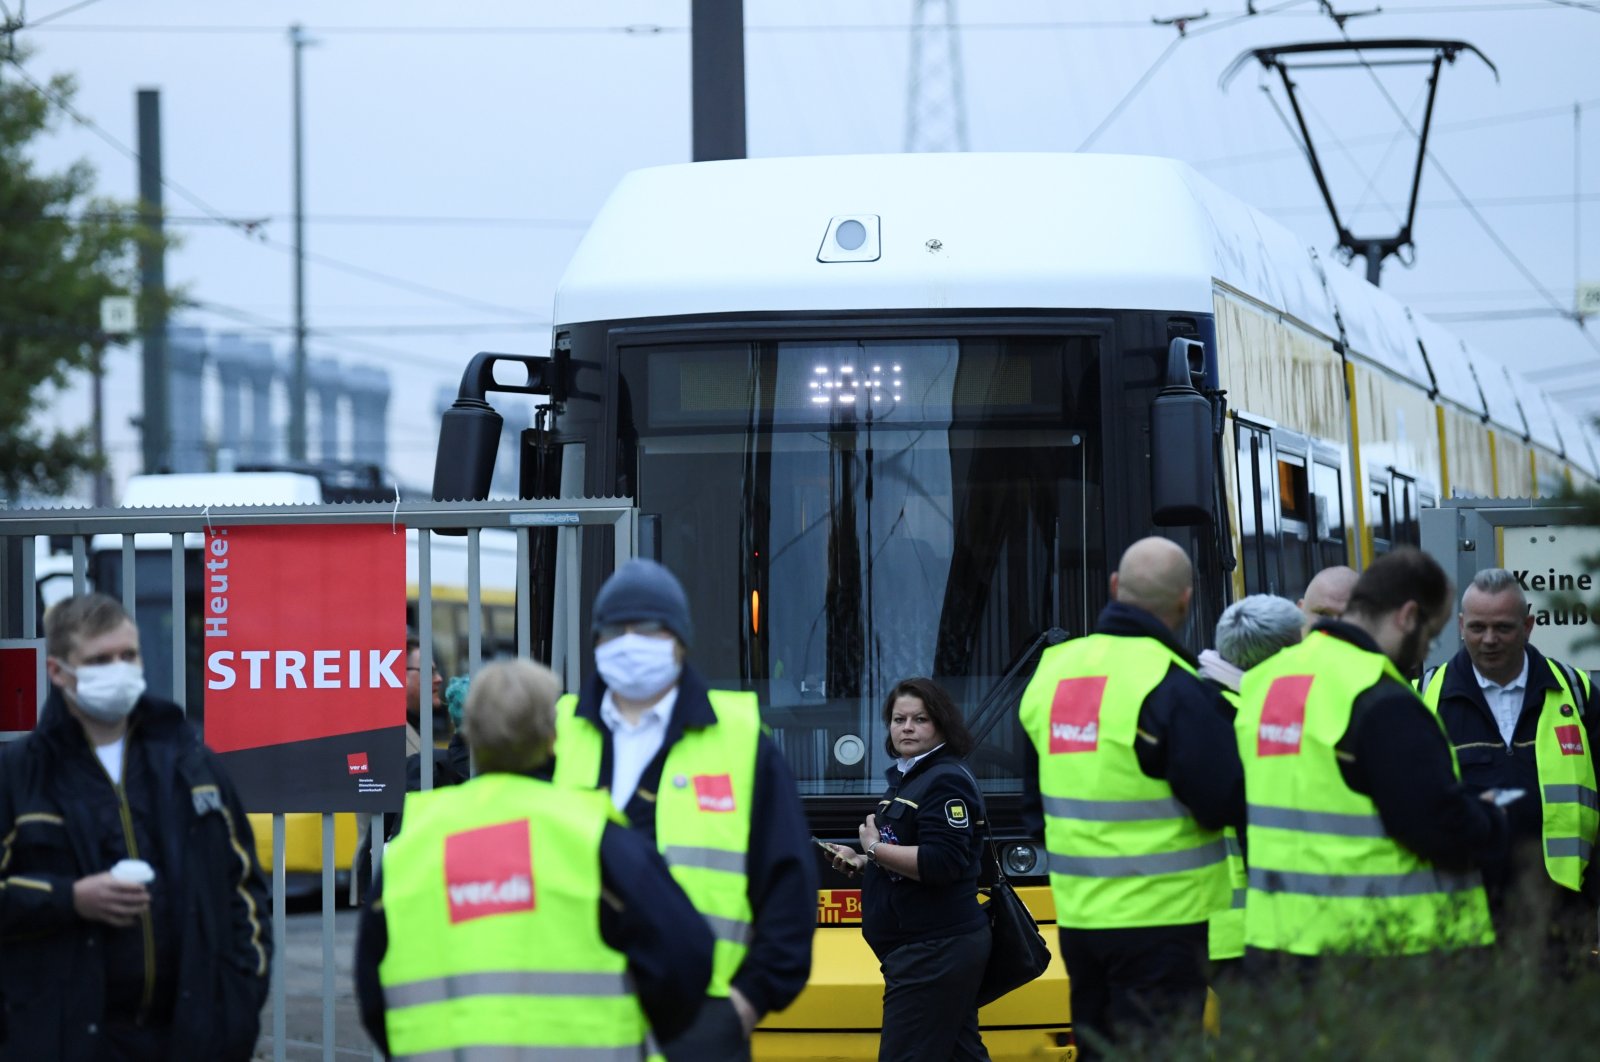 Nationwide public transit strikes cause disruption in Germany | Daily Sabah